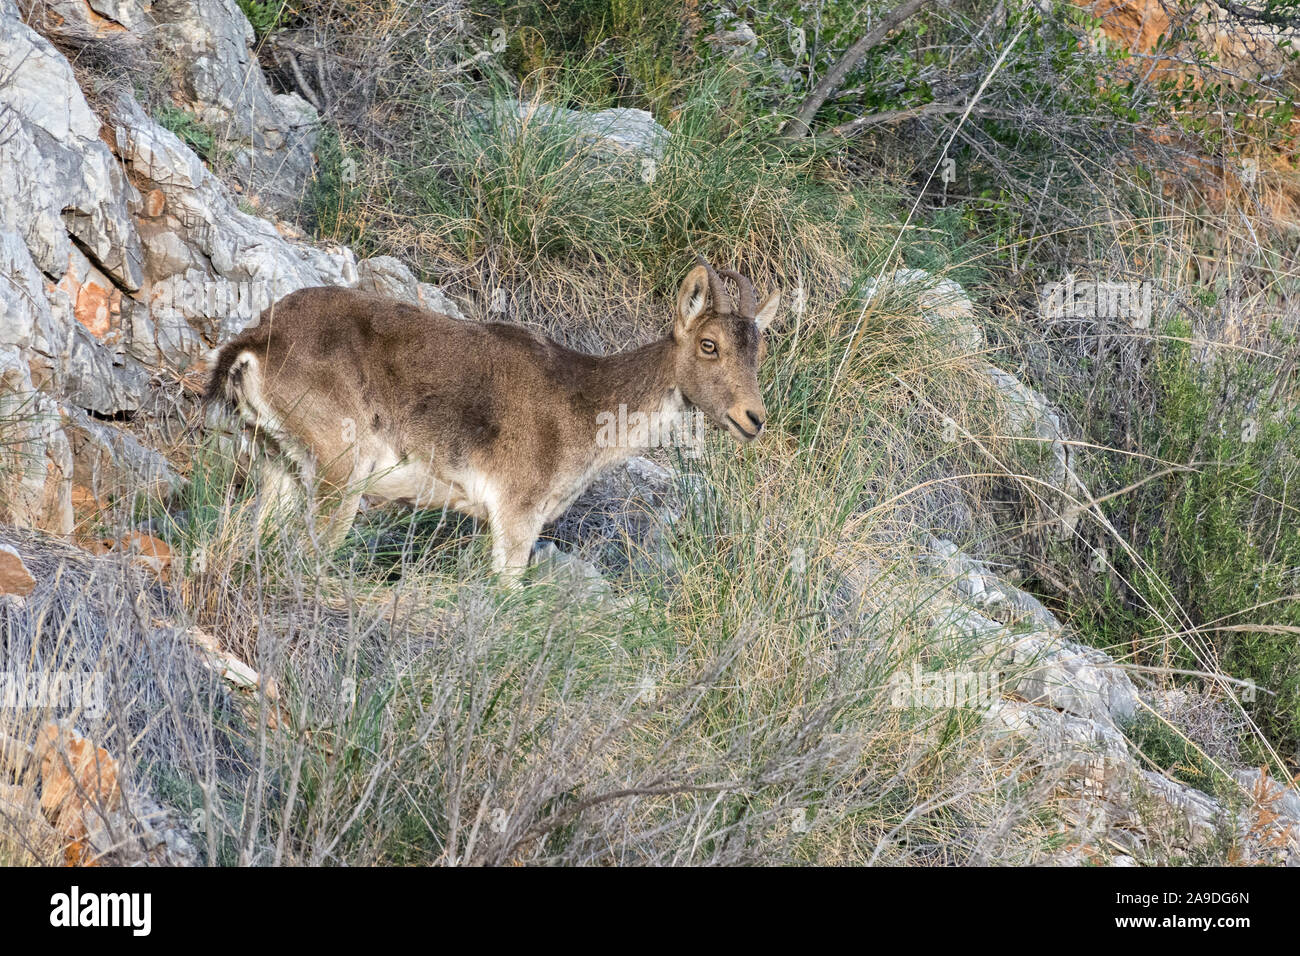 A female Iberian Ibex standing on a cliff face surrounded by scrub Stock Photo